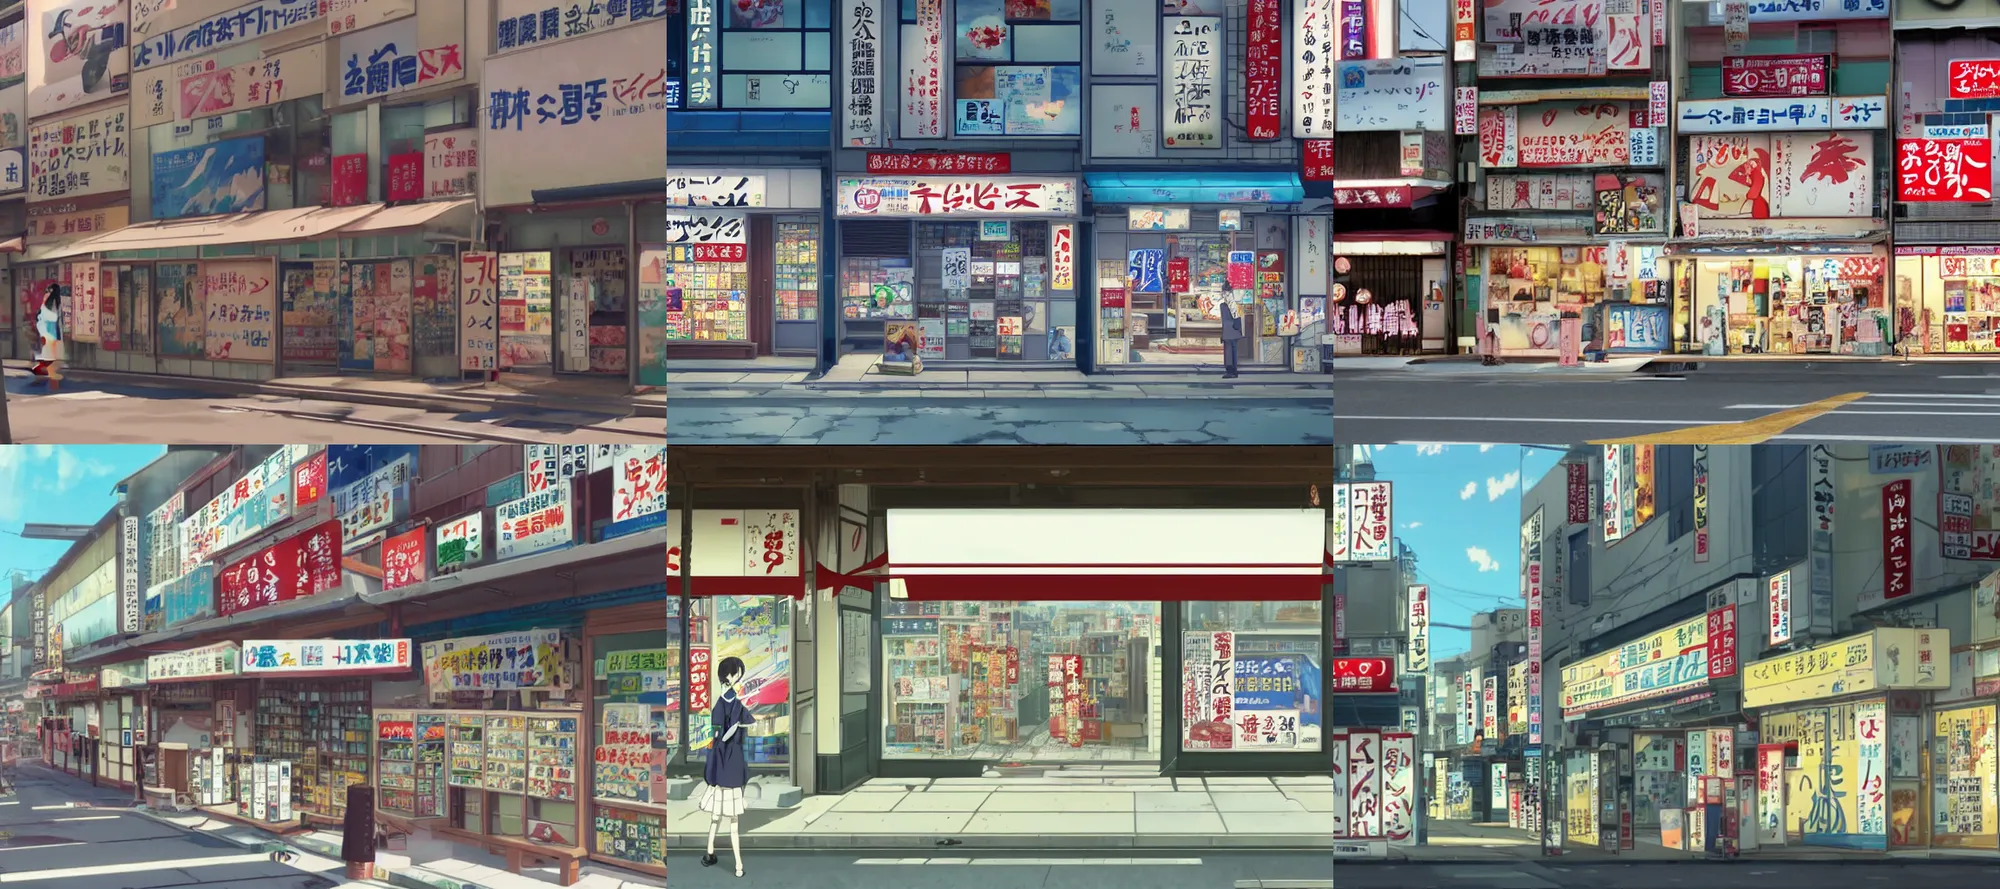 Prompt: a japanese storefront with many signs and advertisements, screenshot from the anime by Makoto Shinkai